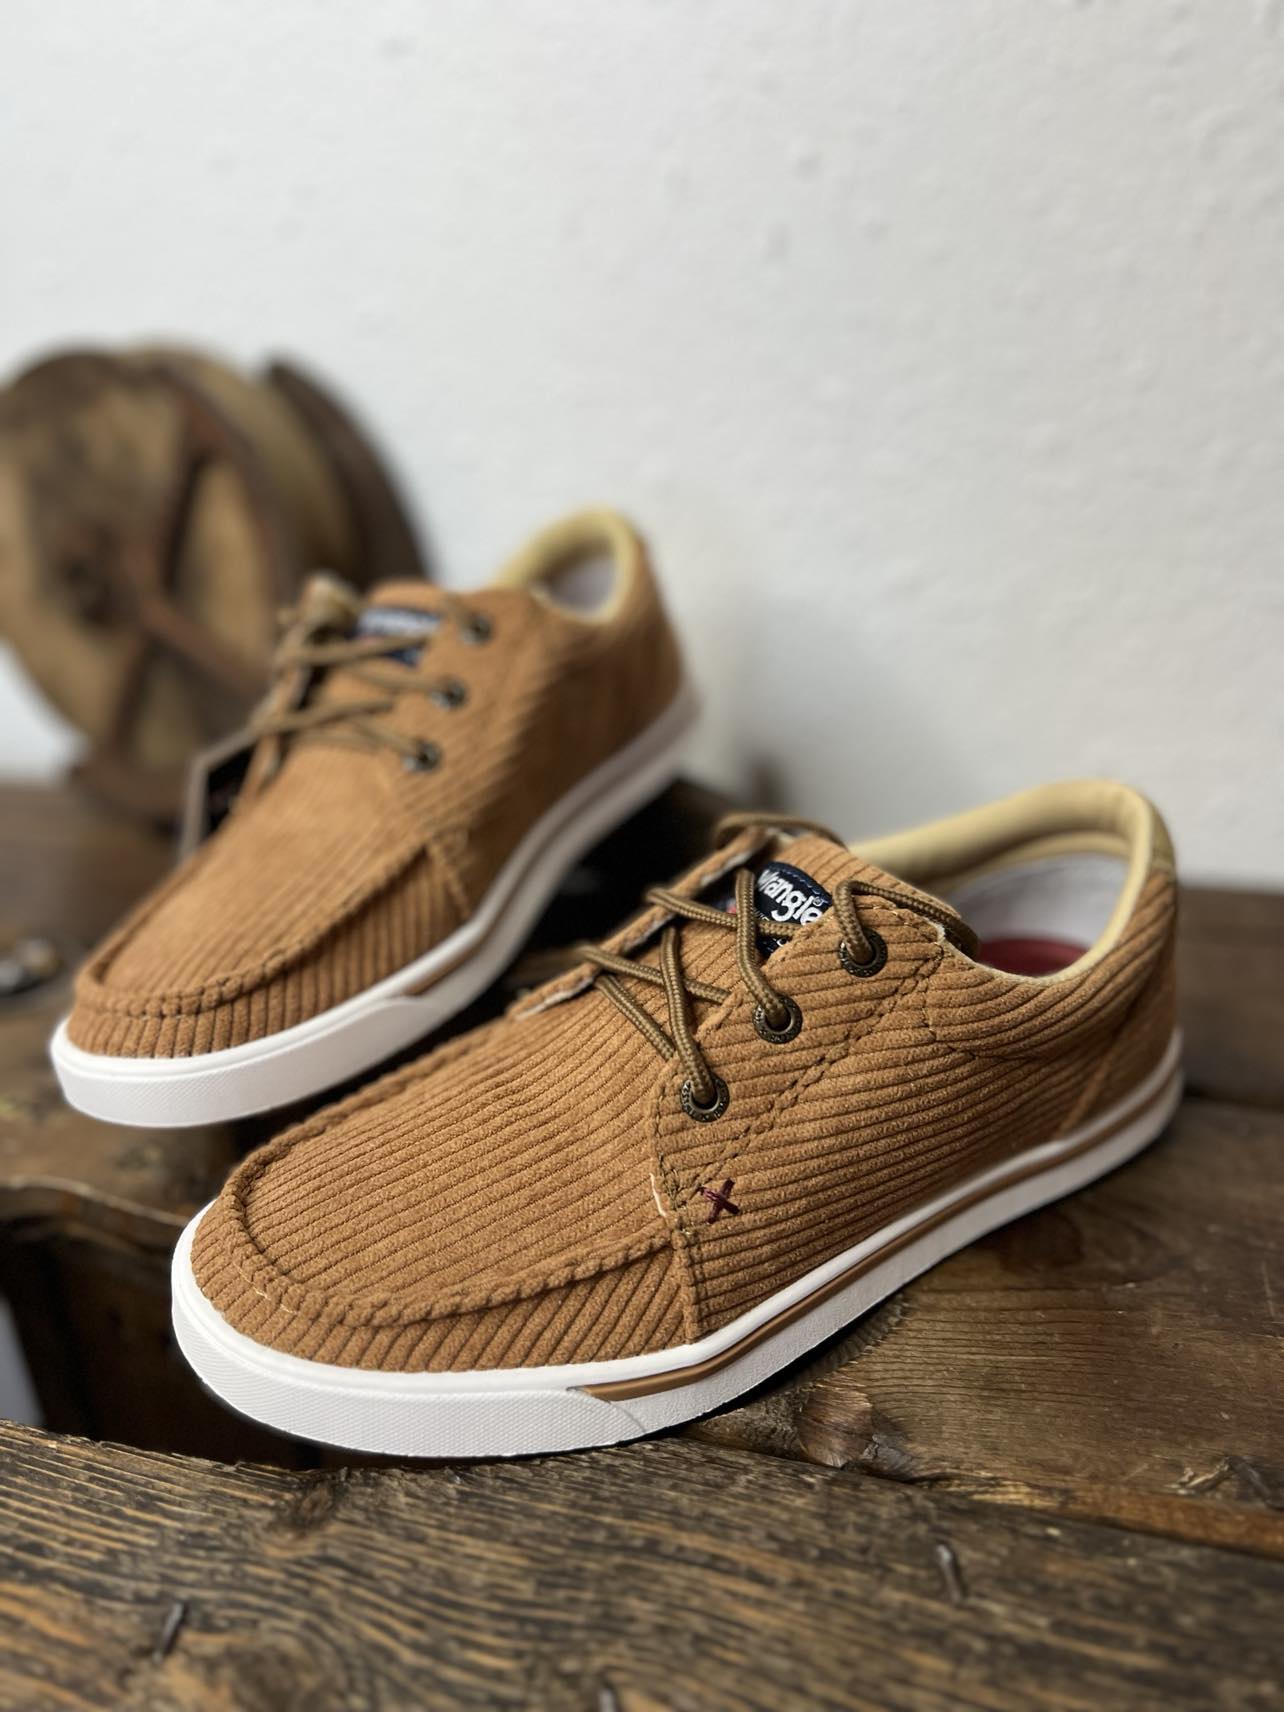 Women's Twisted X Meerkat Kicks-Women's Casual Shoes-Twisted X Boots-Lucky J Boots & More, Women's, Men's, & Kids Western Store Located in Carthage, MO